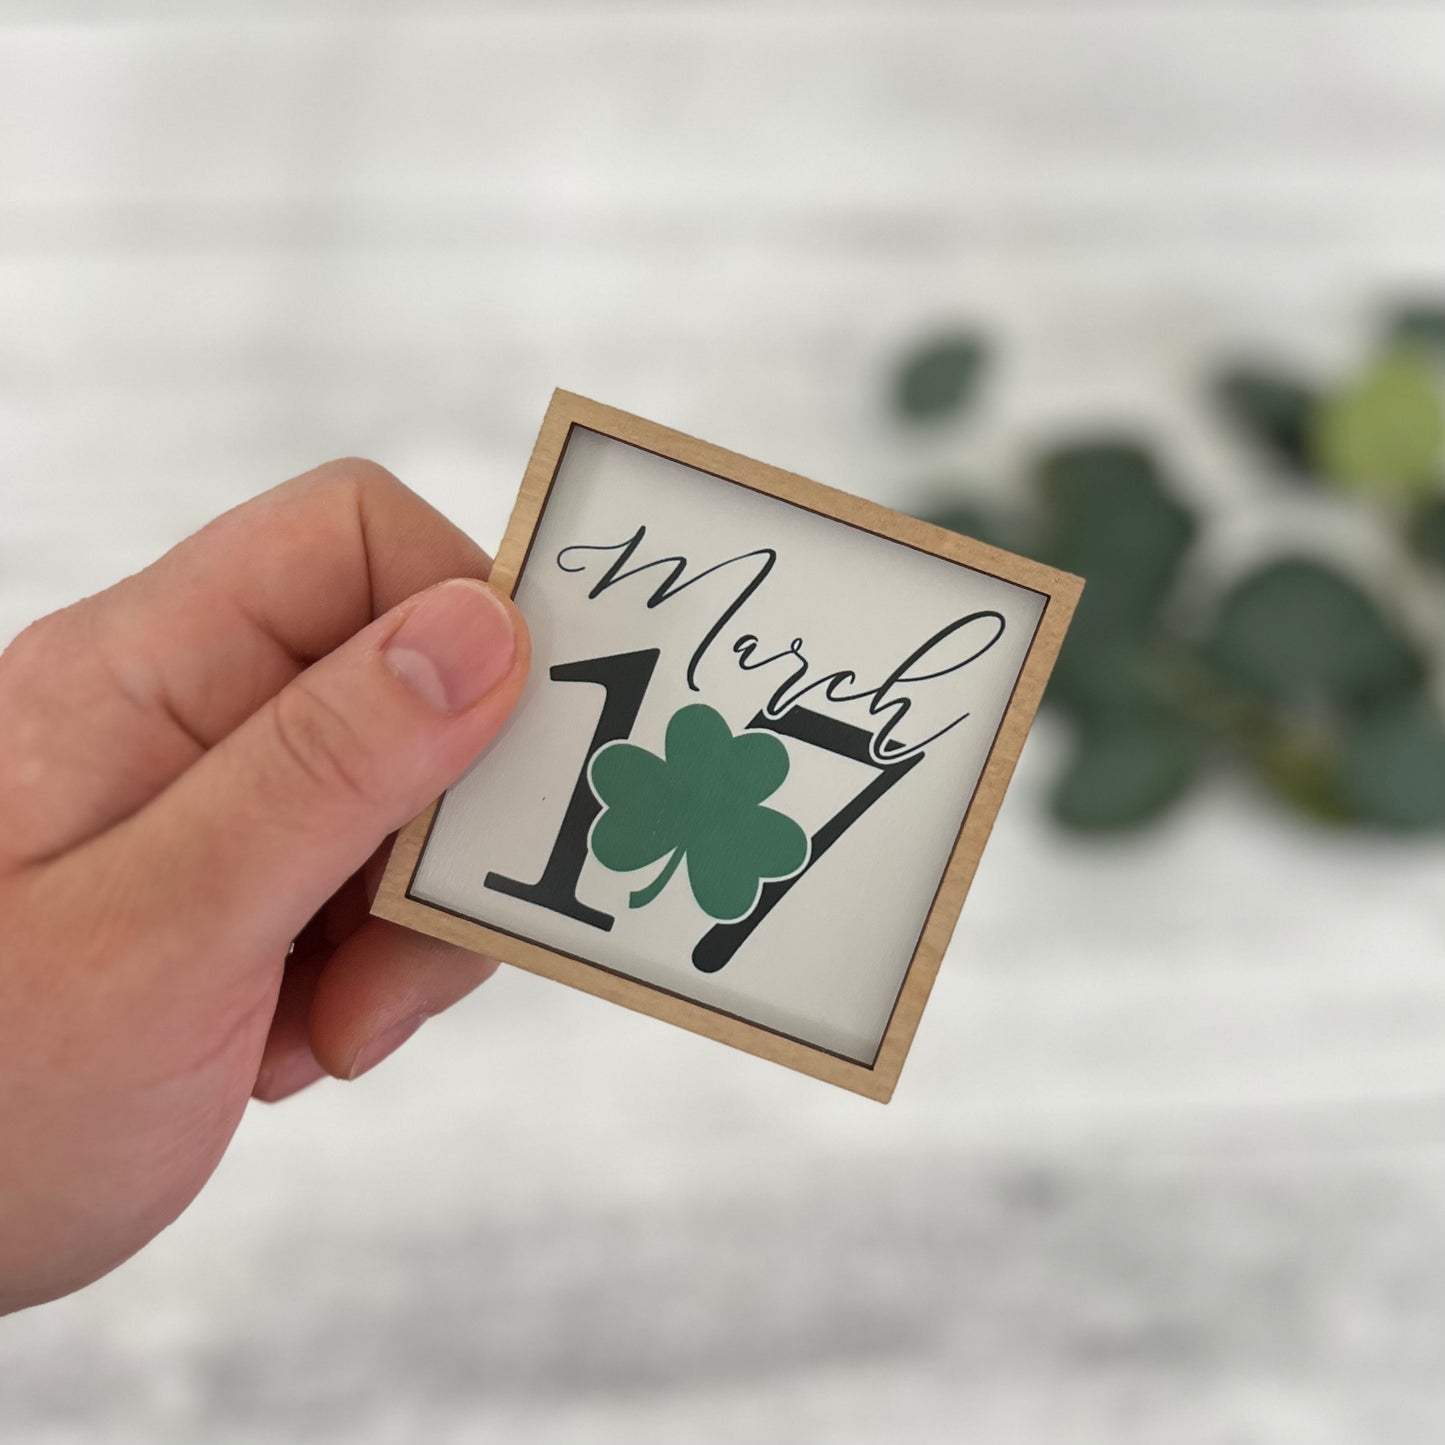 Mini Framed St. Patrick's Day Sign | March 17 Sign